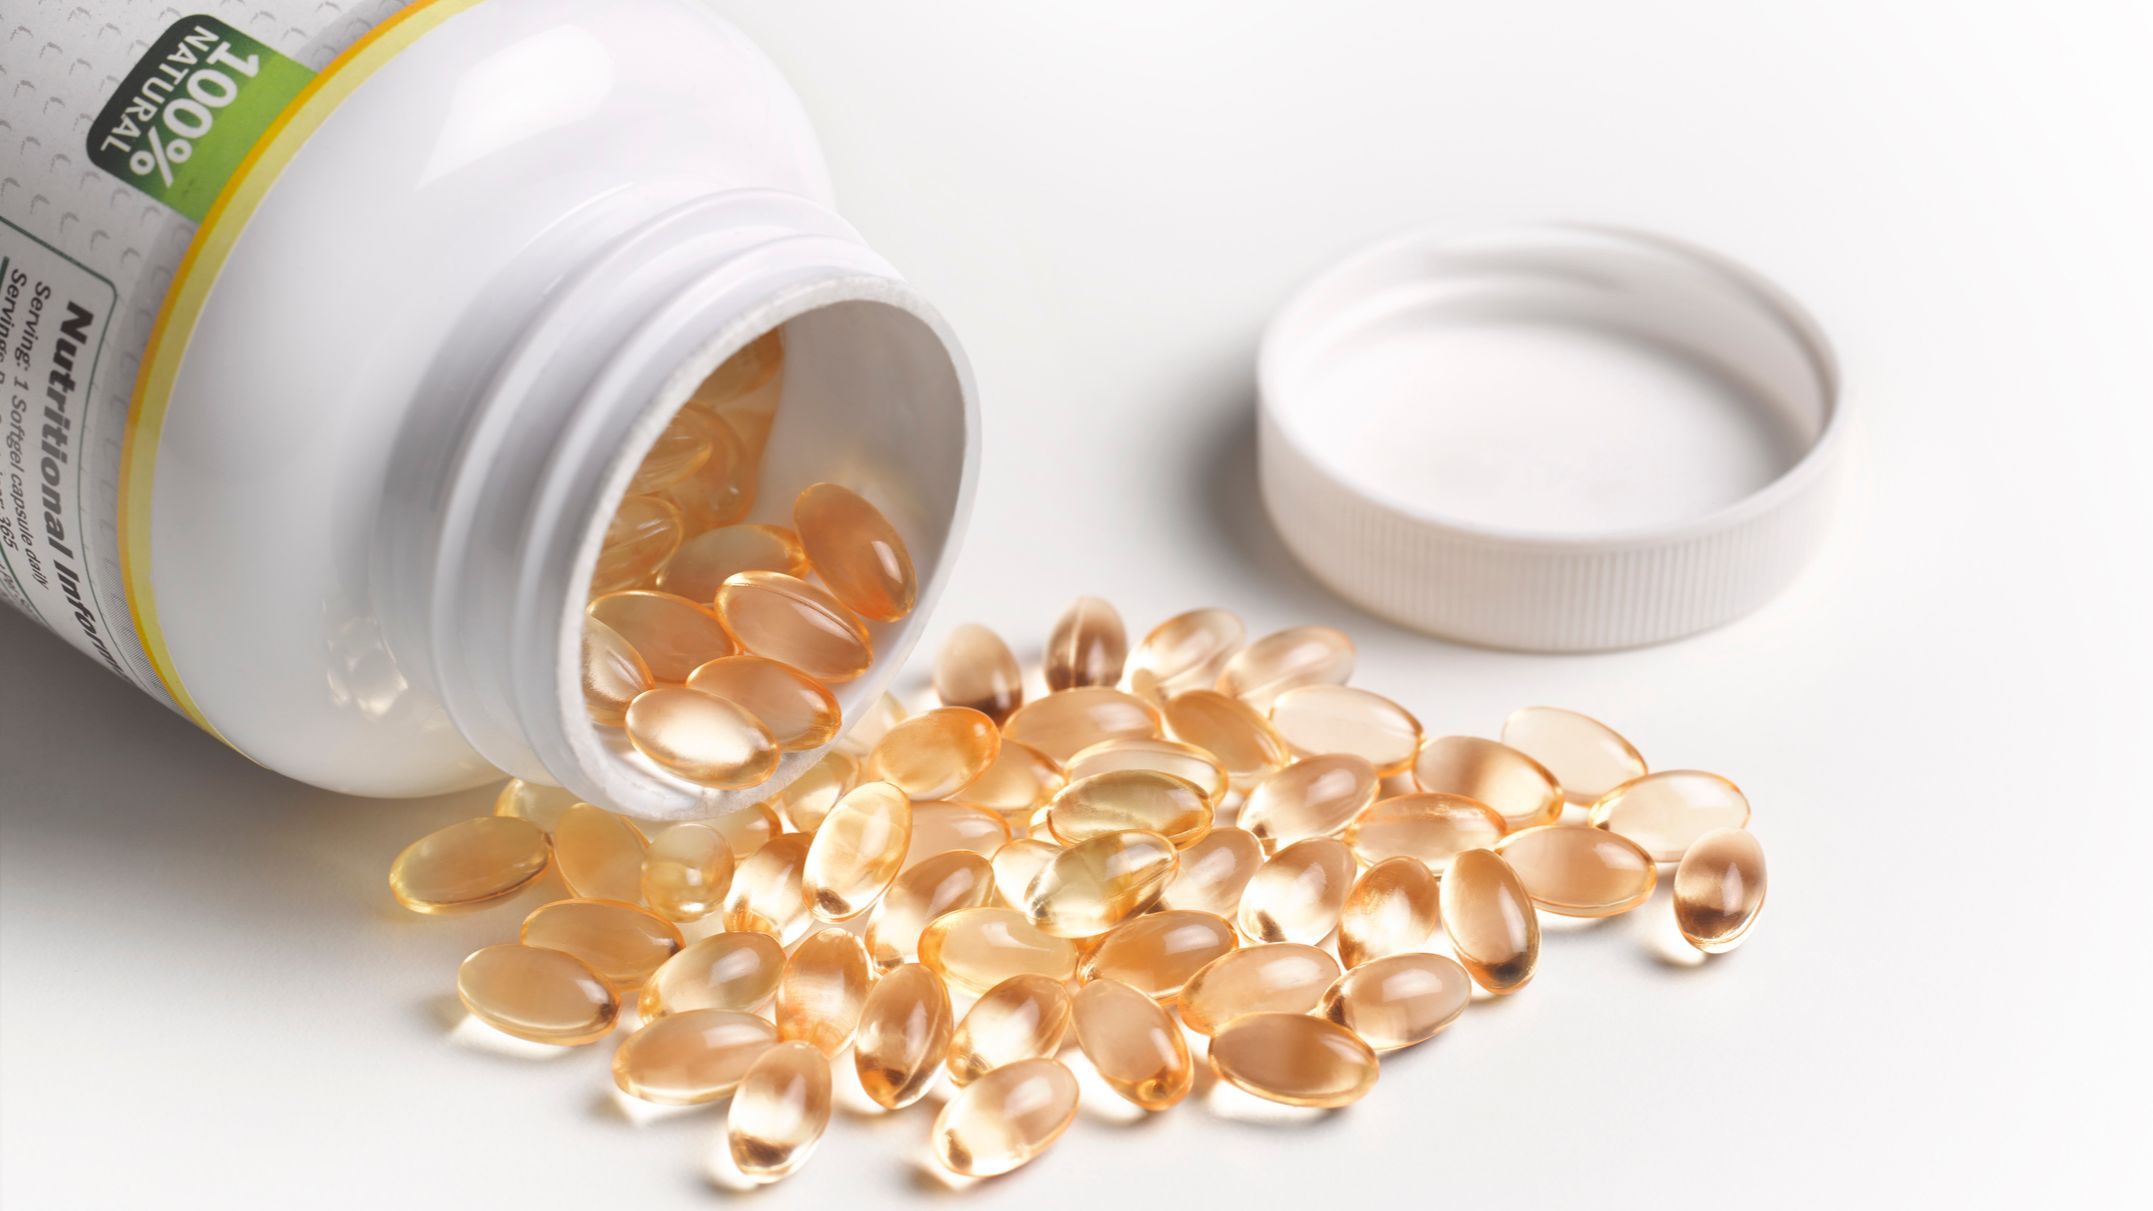 Vitamin D could help prevent dementia, according to a study